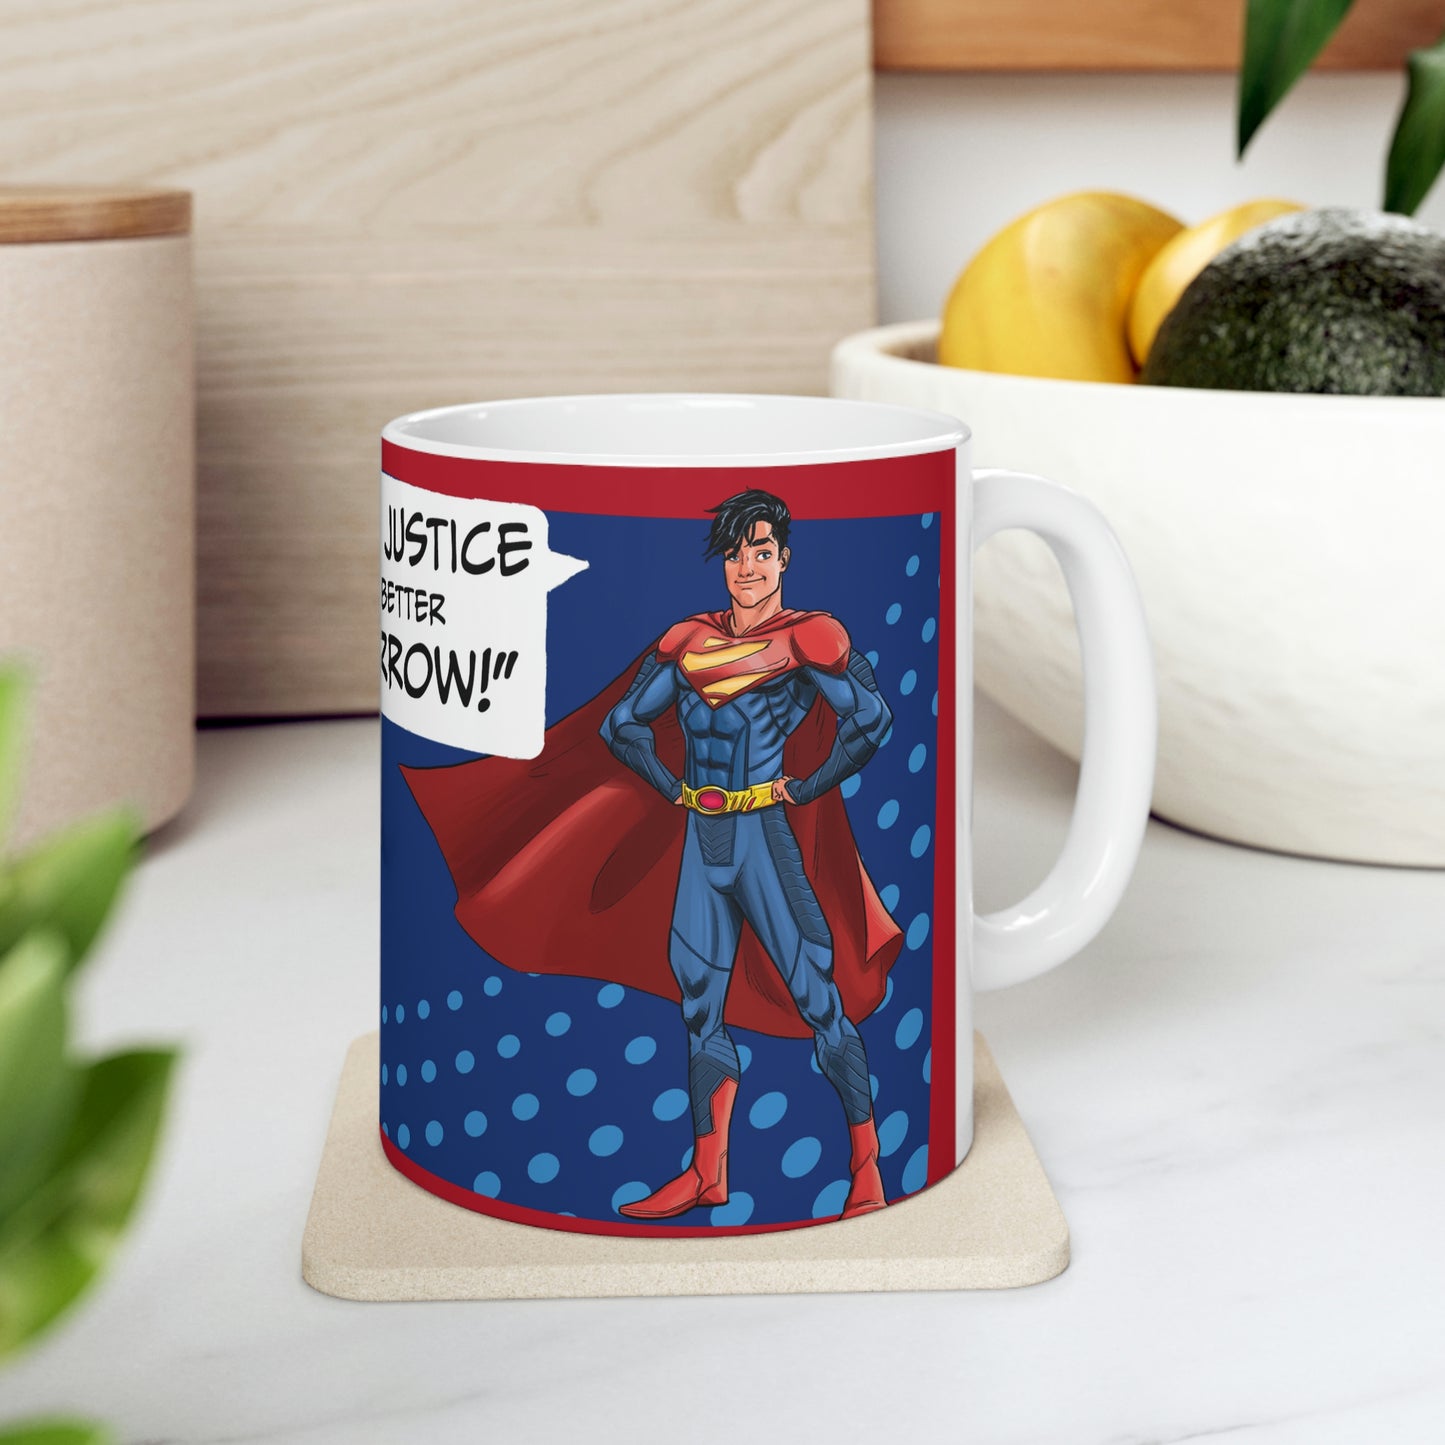 "Truth, Justice, and a Better Tomorrow" Mug